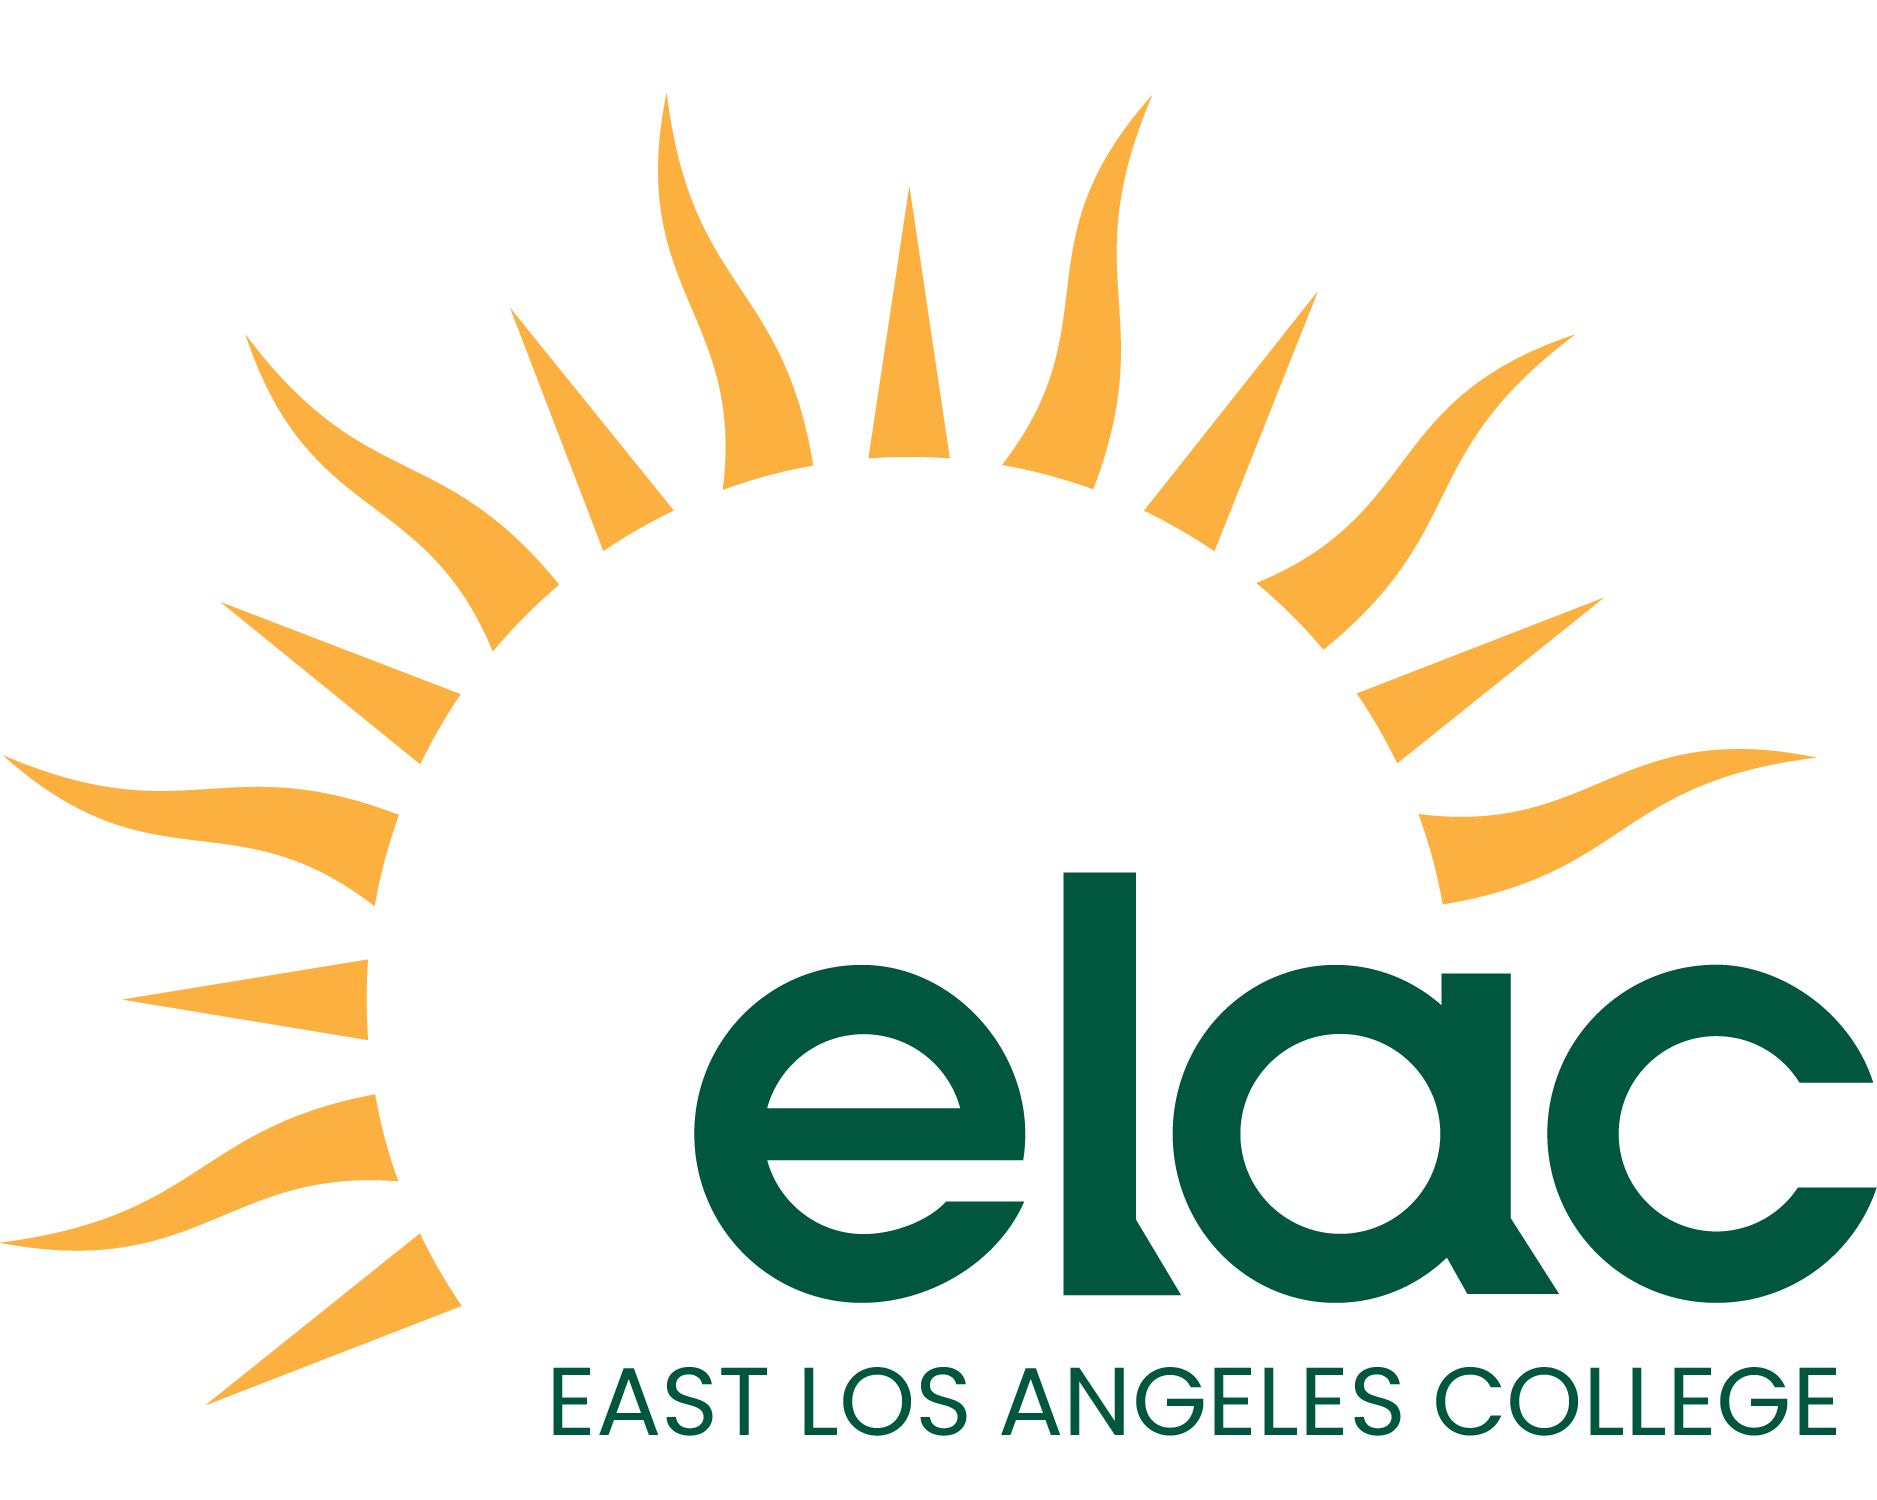 Promising Practices East Los Angeles College (California) AACC